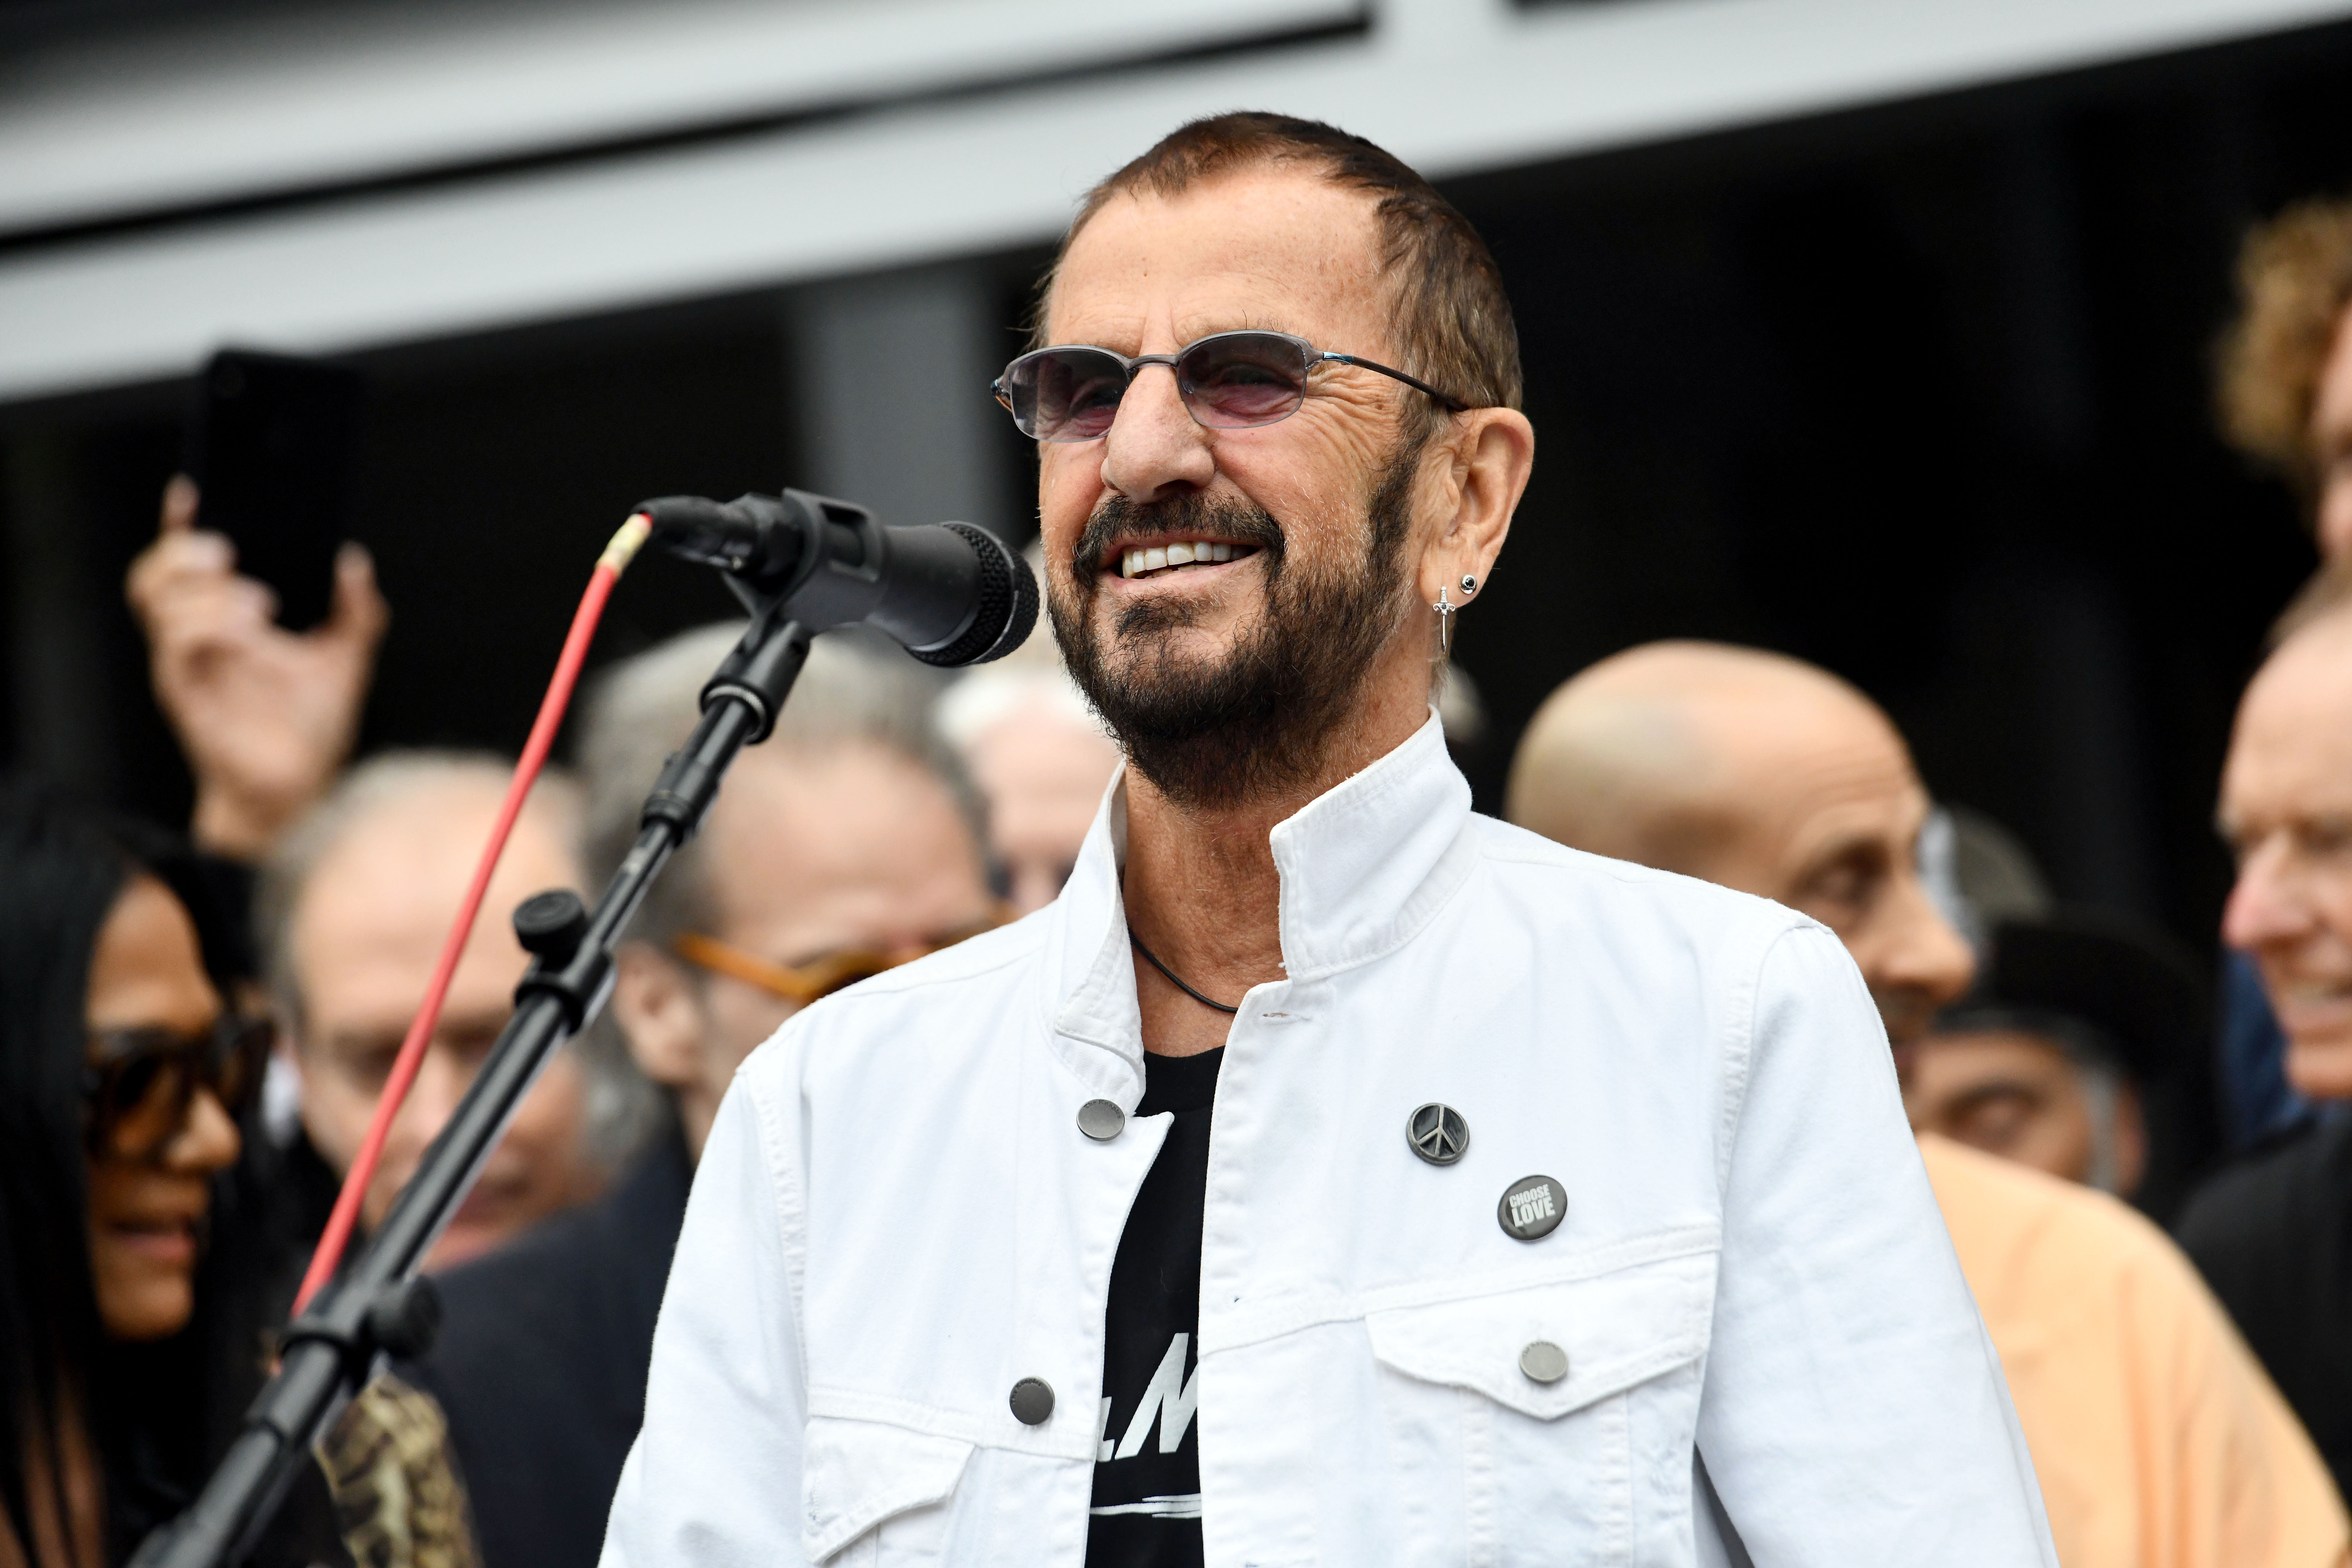 Former Beatle Ringo Starr smiles as he greets a crowd wearing a white jacket and his trademark violet sunglasses.